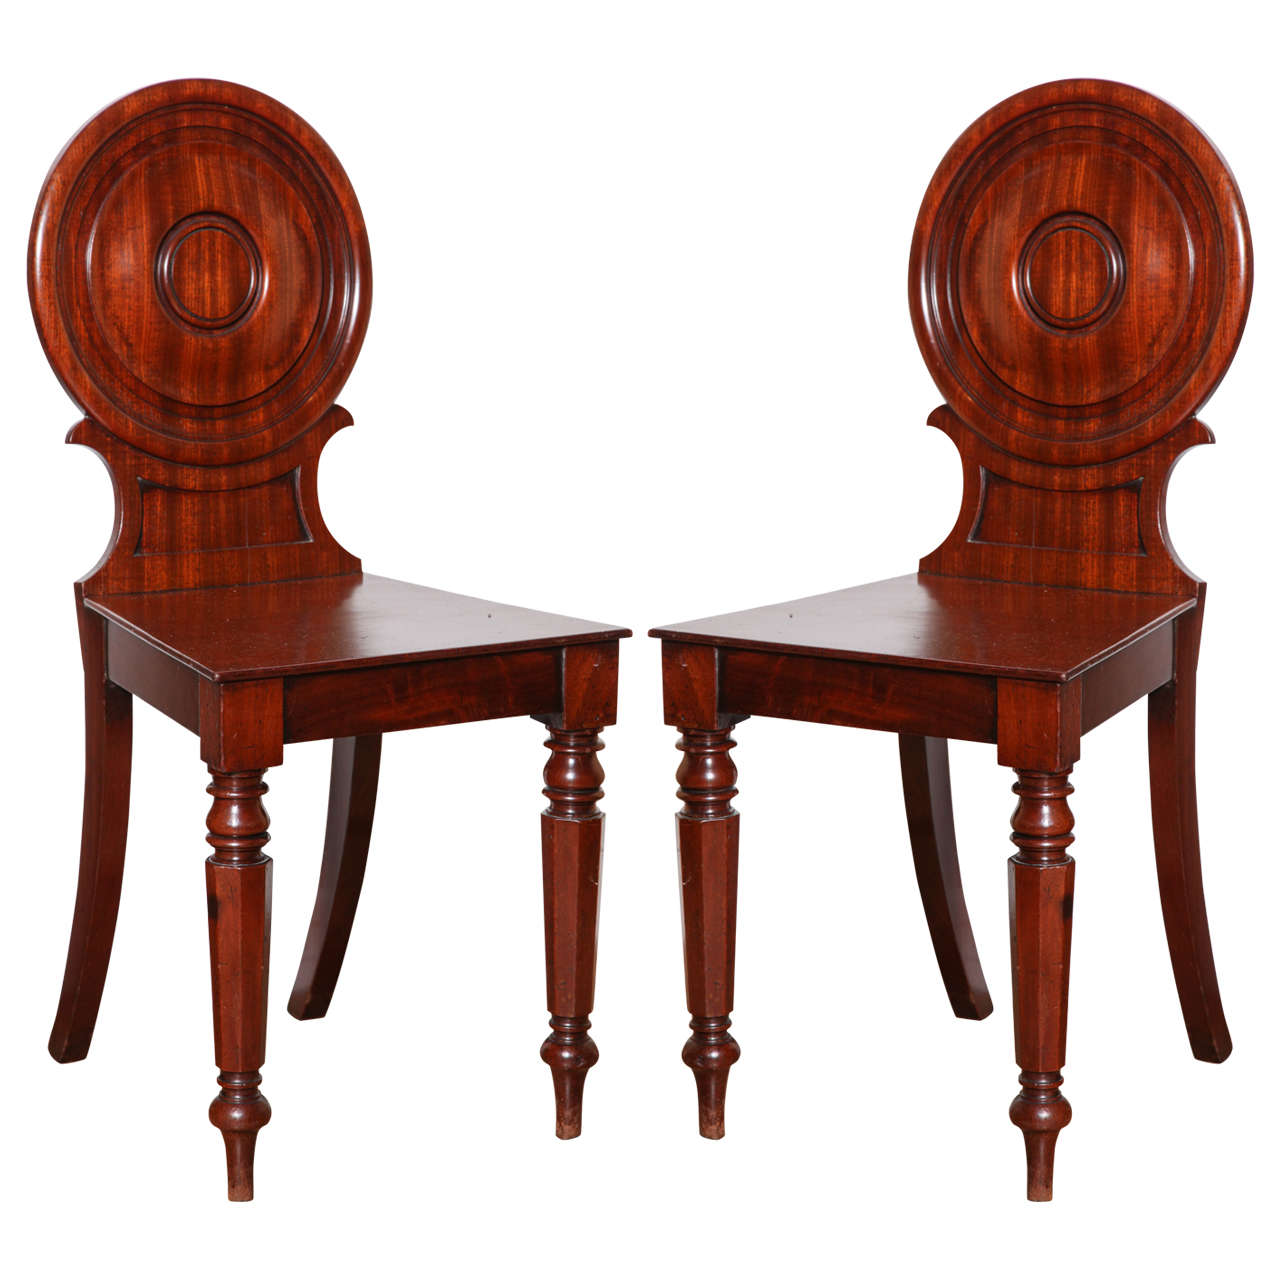 Pair of Carved Mahogany Hall Chairs, England, Early 19th Century For Sale